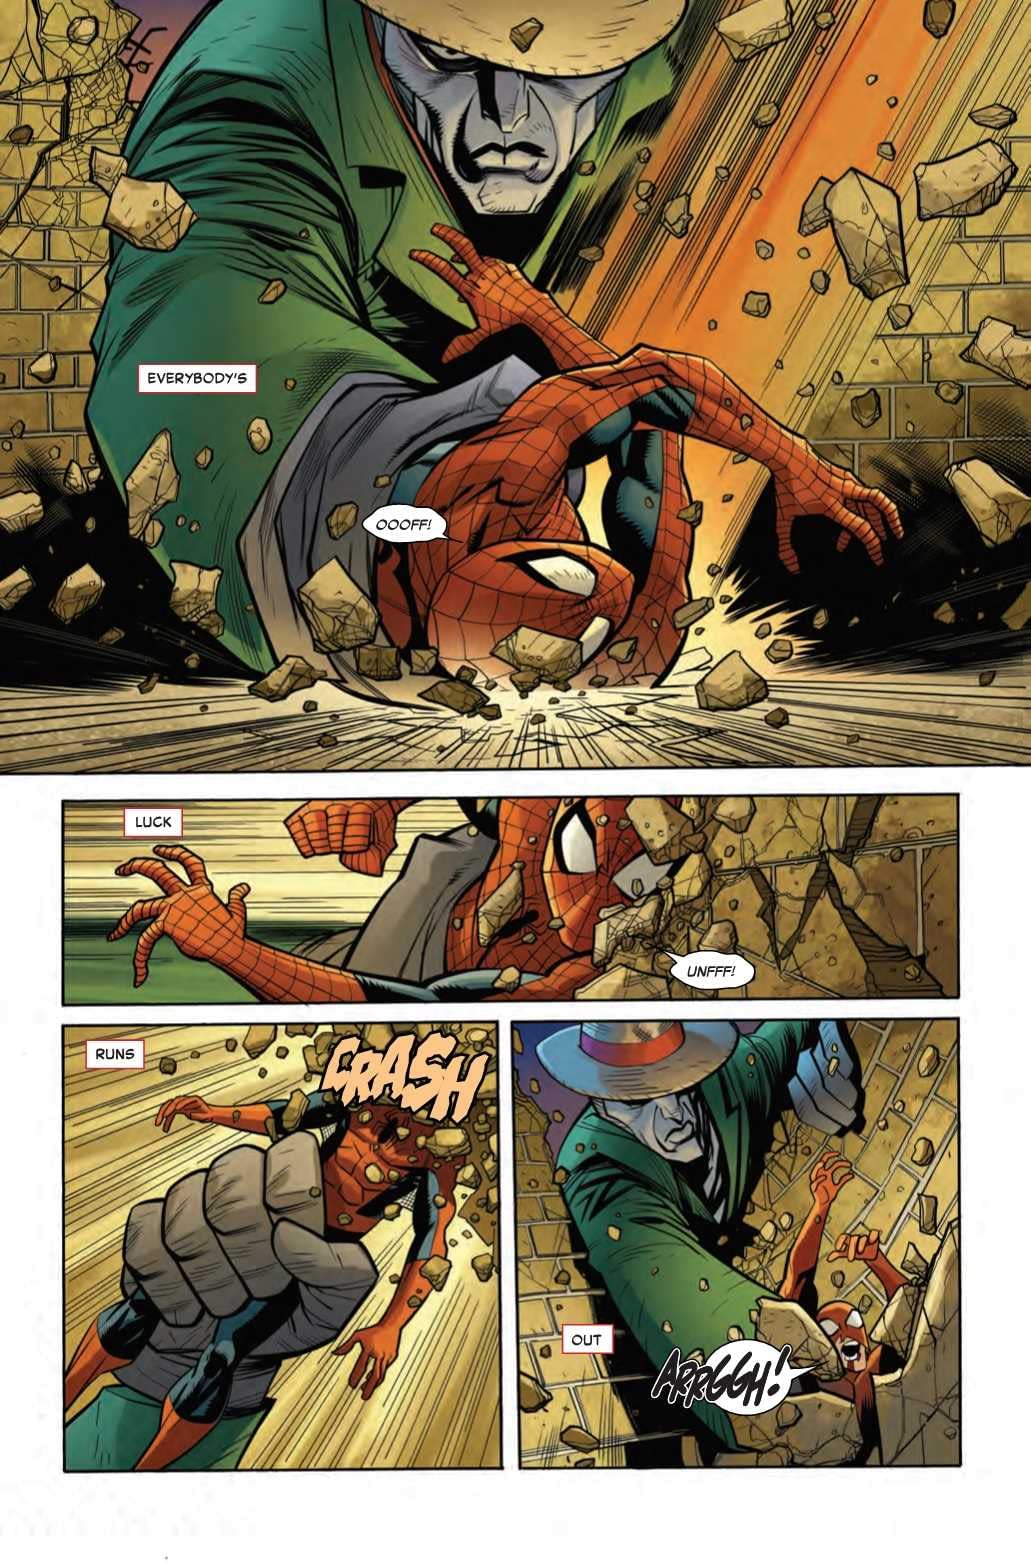 Continuity Gone Bad in Next Week's Unlucky Amazing Spider-Man #13